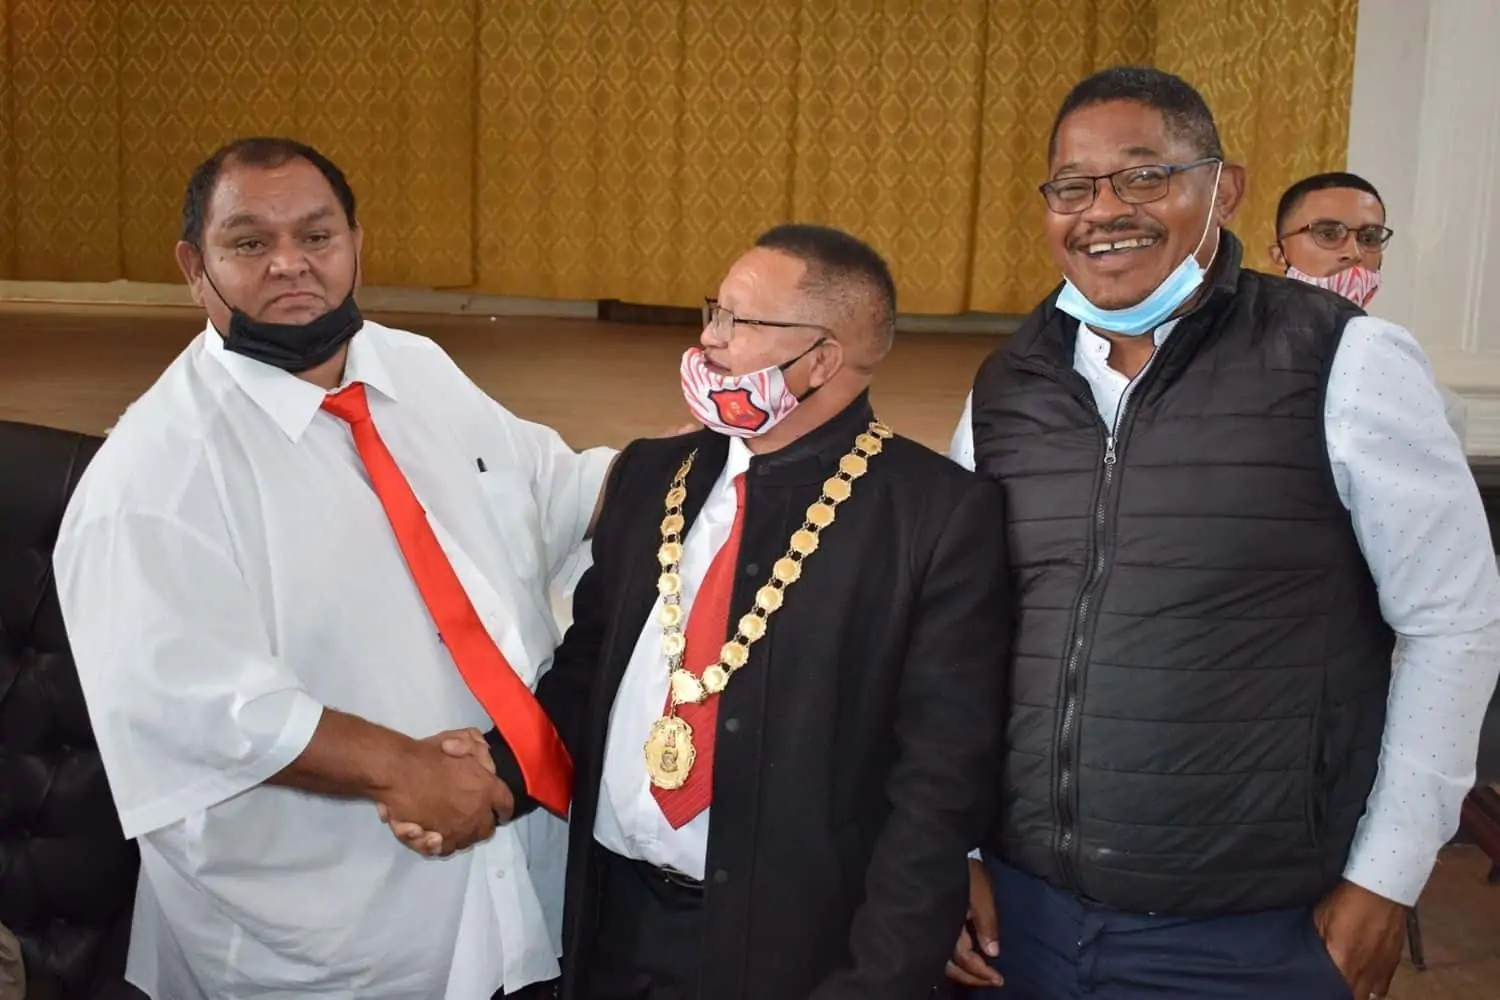 Child rapist re-elected as mayor together with his fraudster deputy in Kannaland